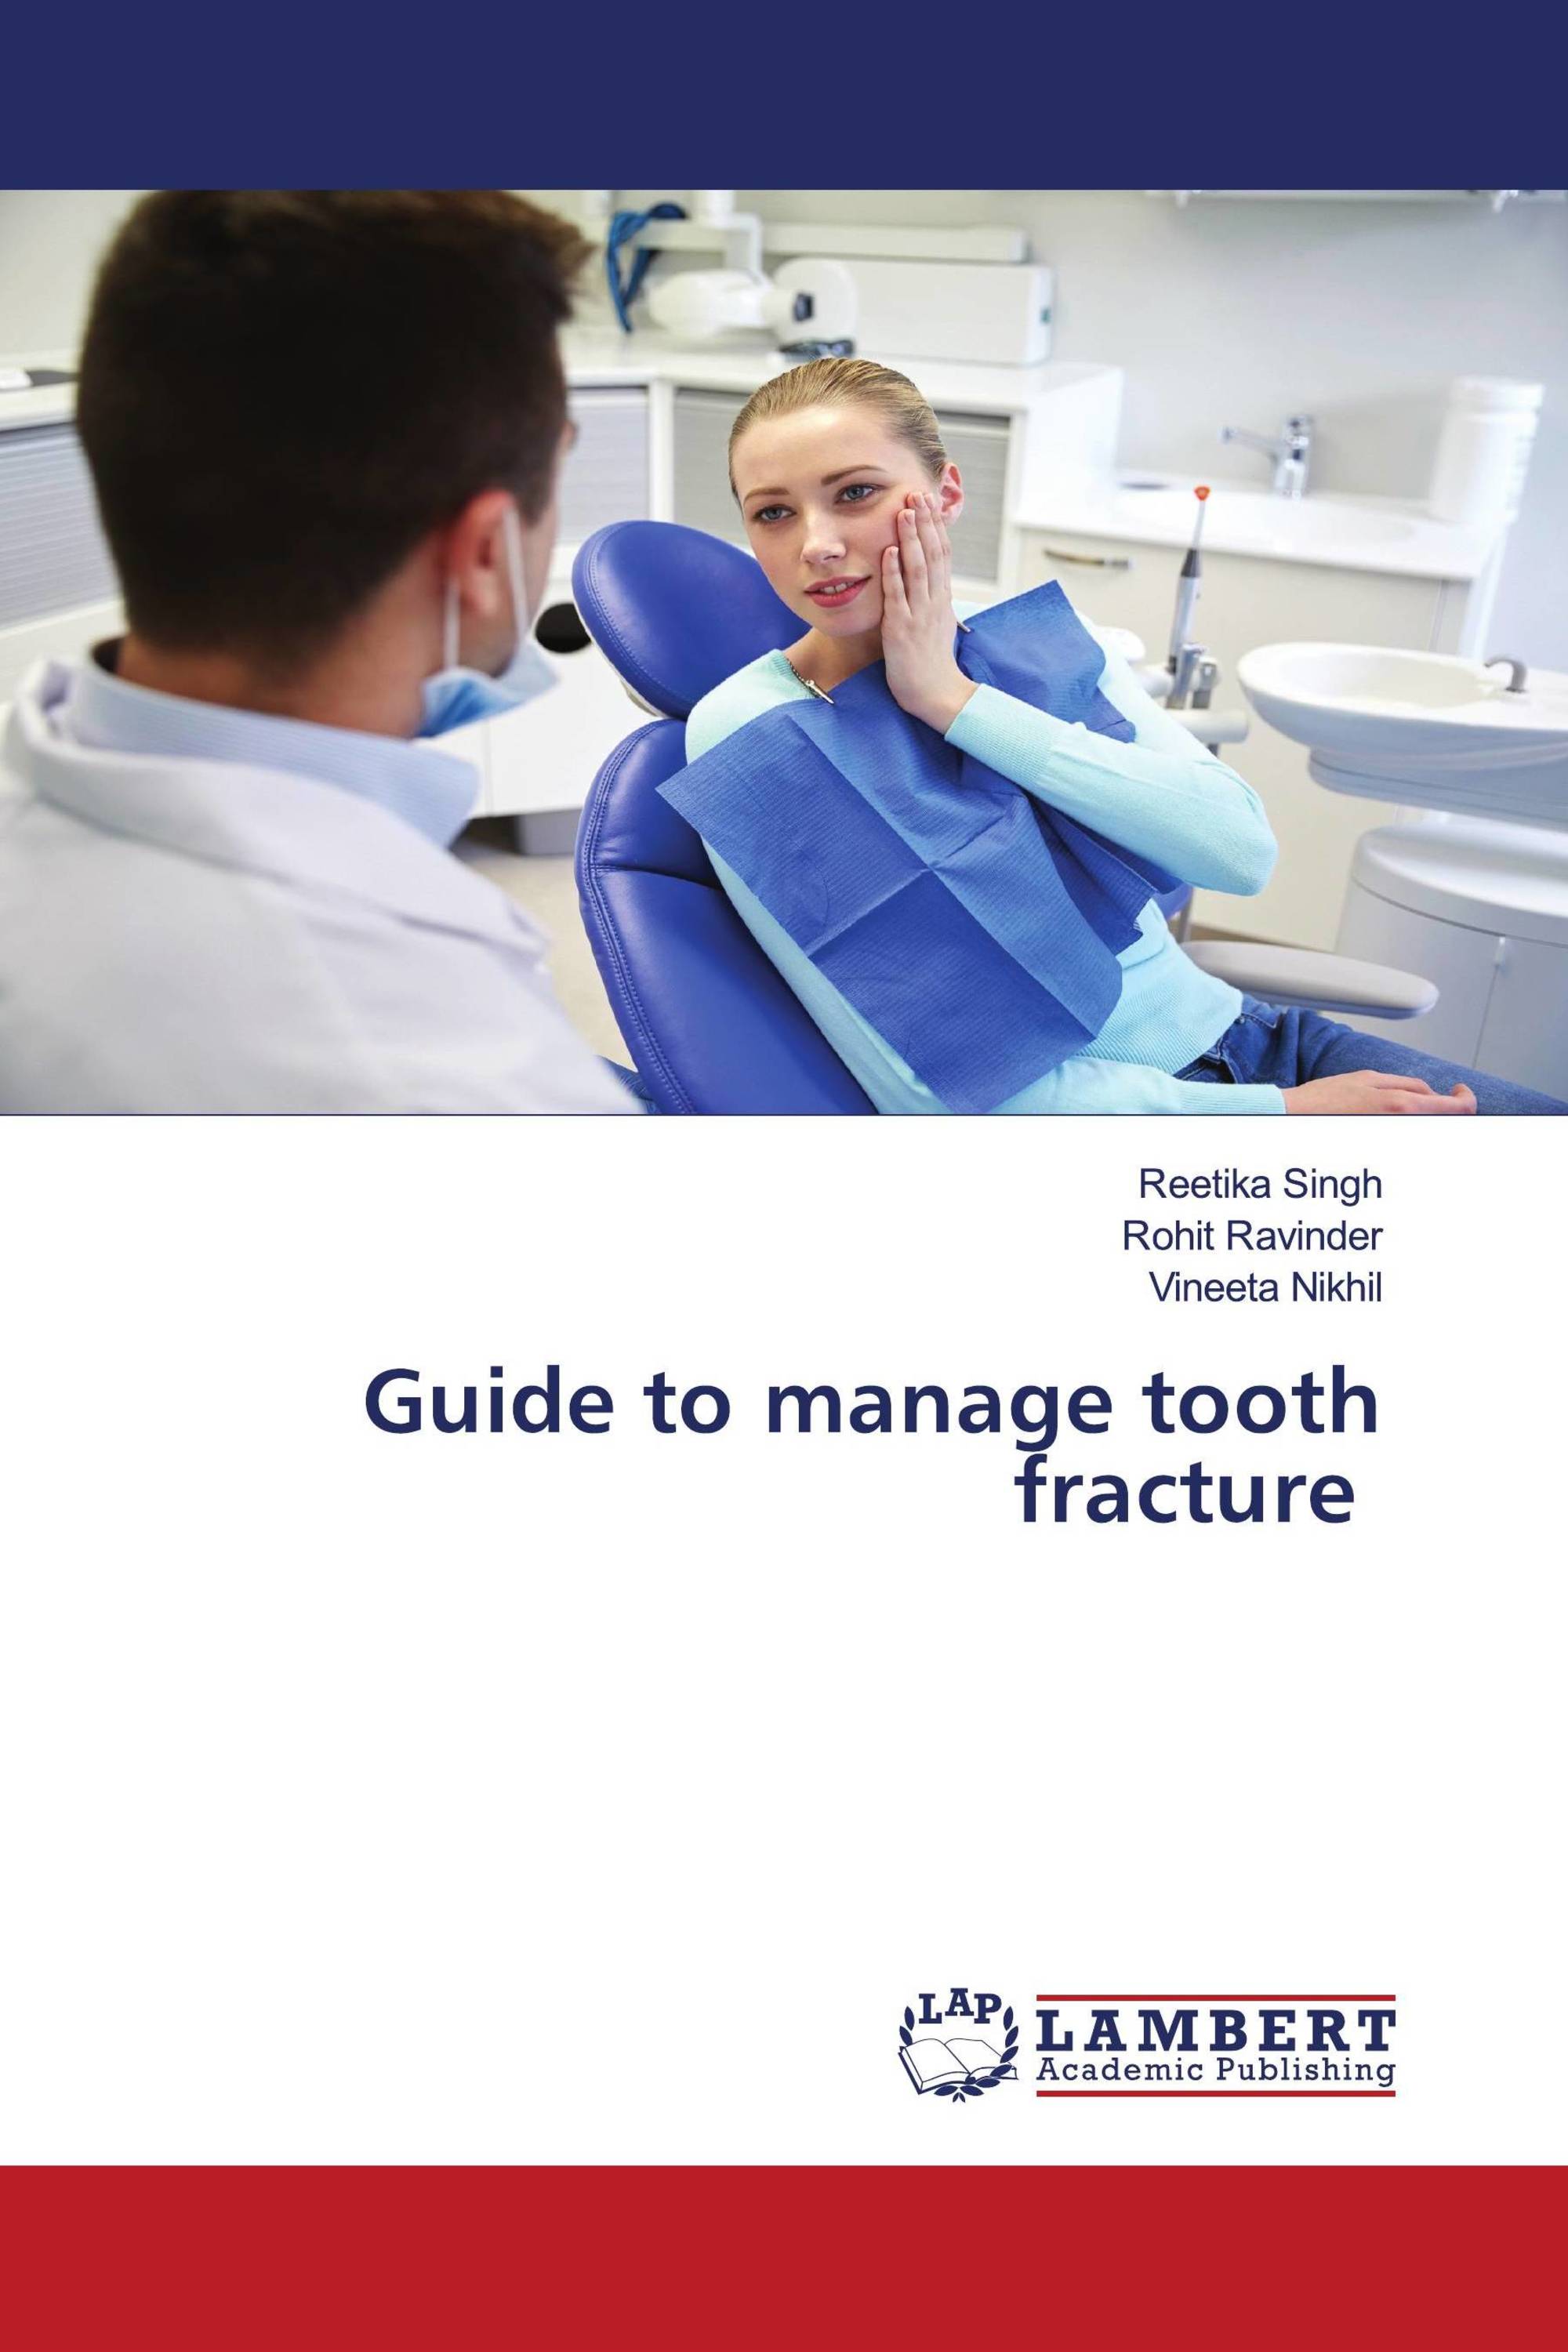 Guide to manage tooth fracture